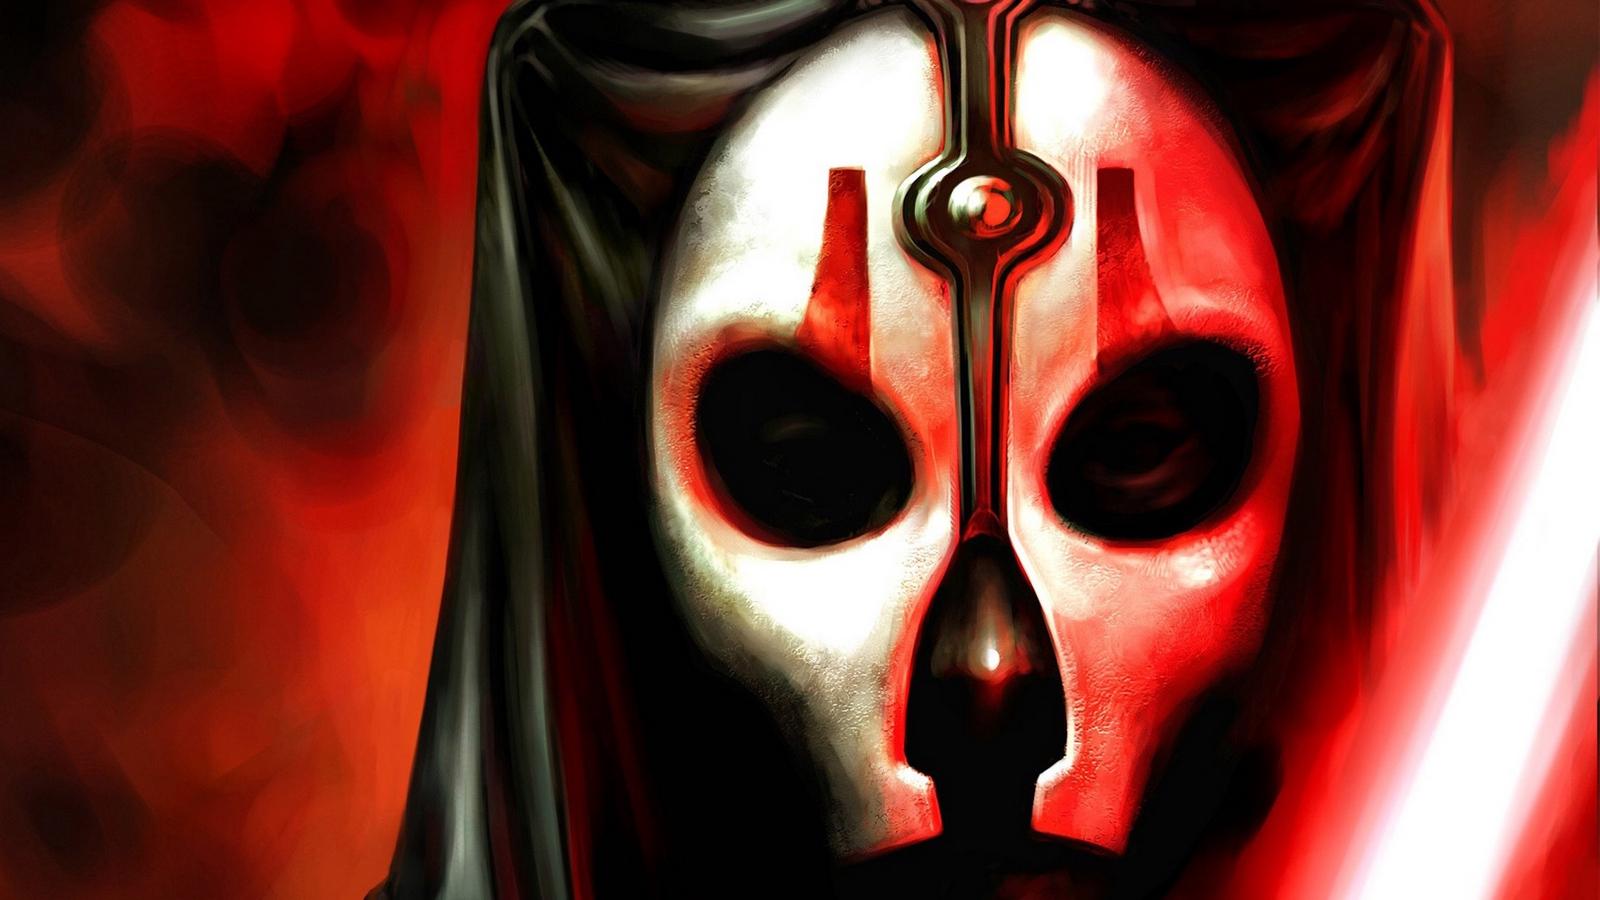 Download wallpapers 1600x900 star wars, knights of the old republic